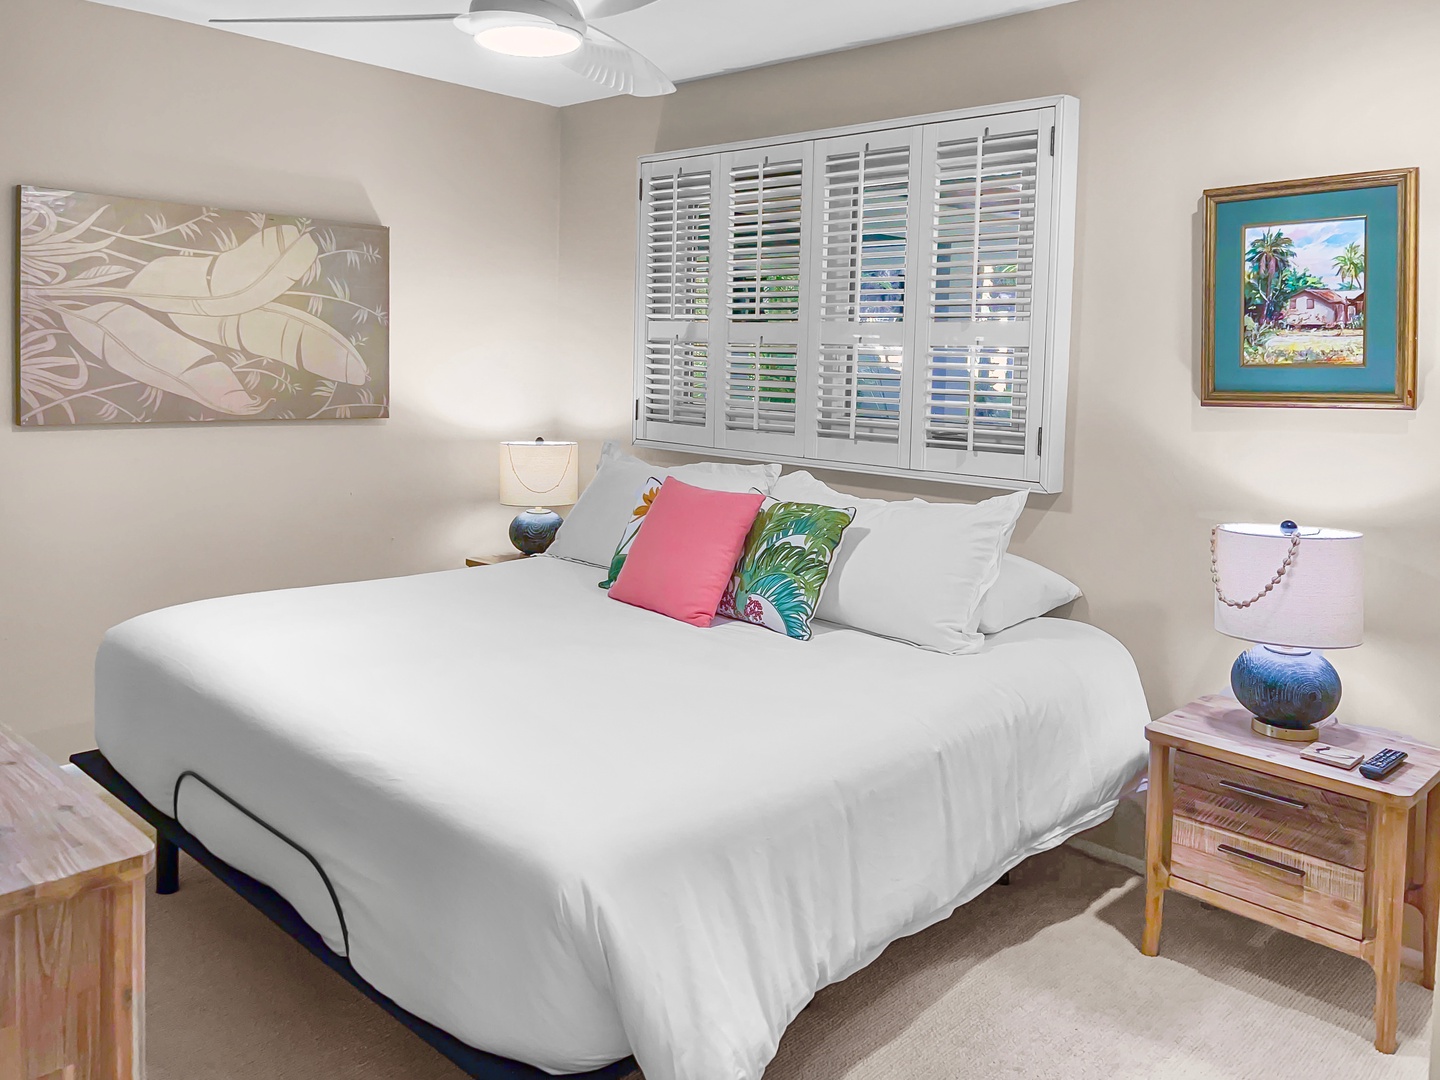 Honolulu Vacation Rentals, Hale Ola - Guest bedroom 5 features a king bed, tv and ensuite